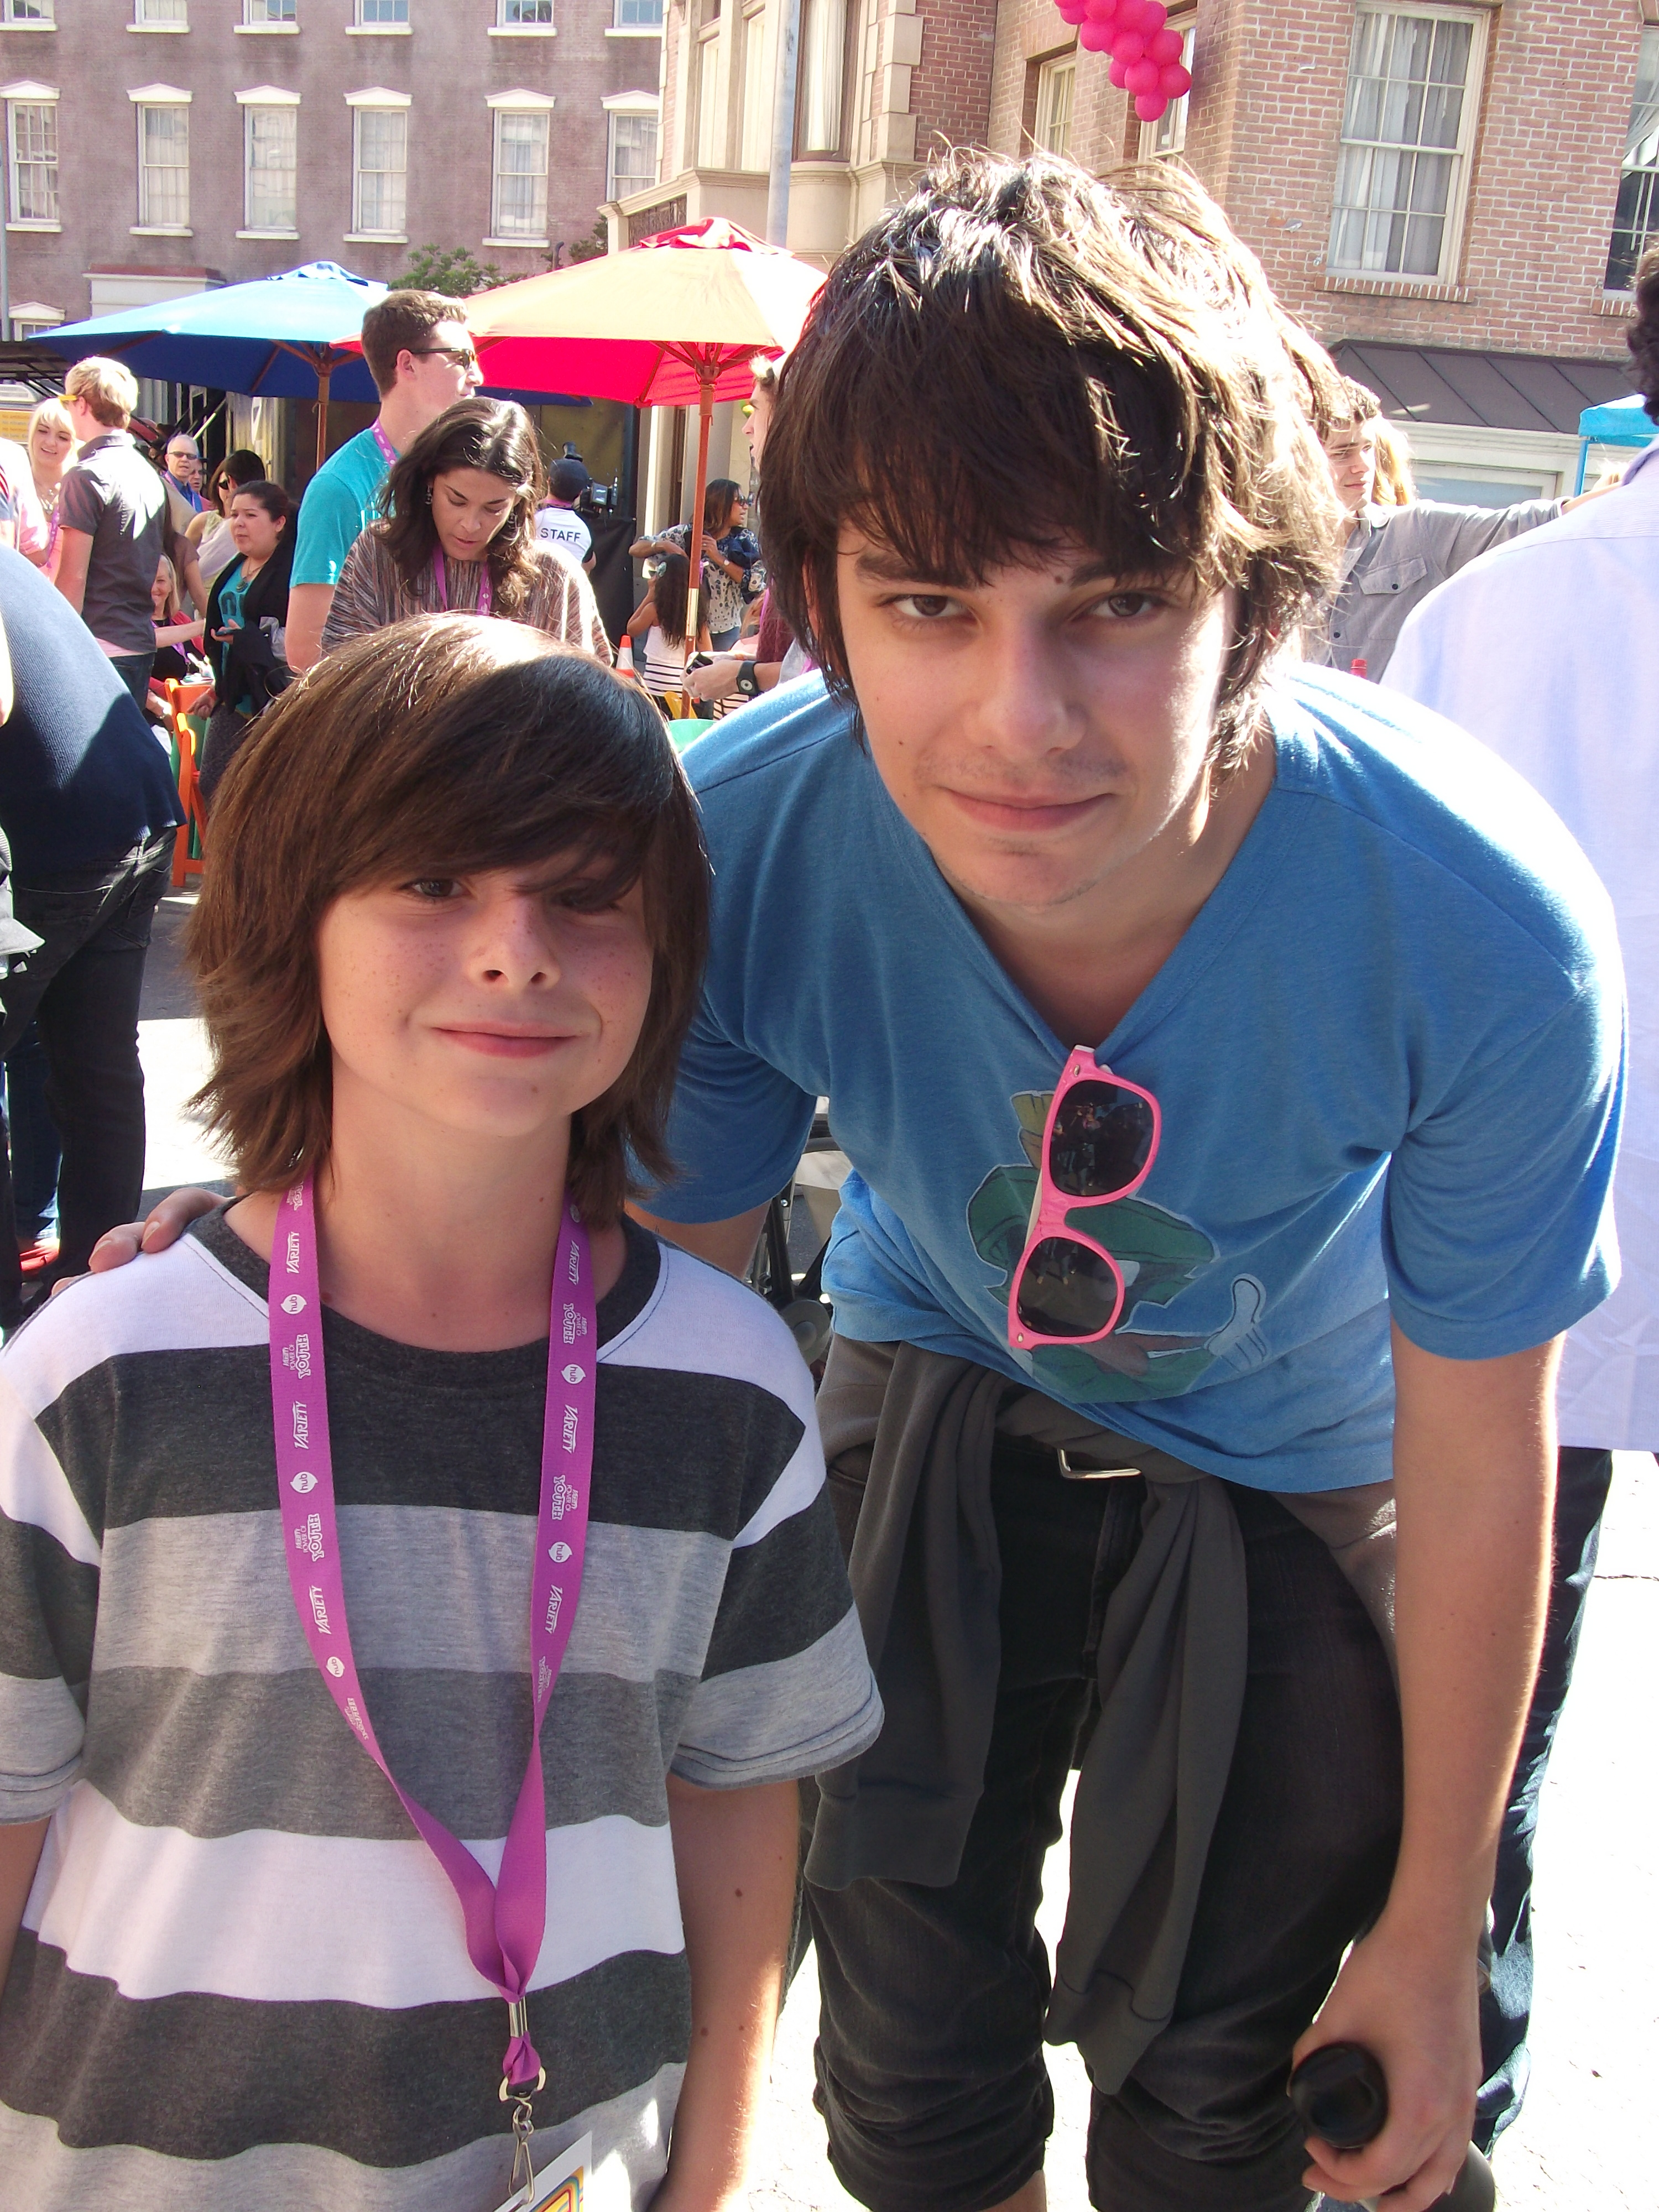 Robbie Tucker & Devon Bostick 'The Power of Youth' Event Paramount Studios Hollywood 10/2011